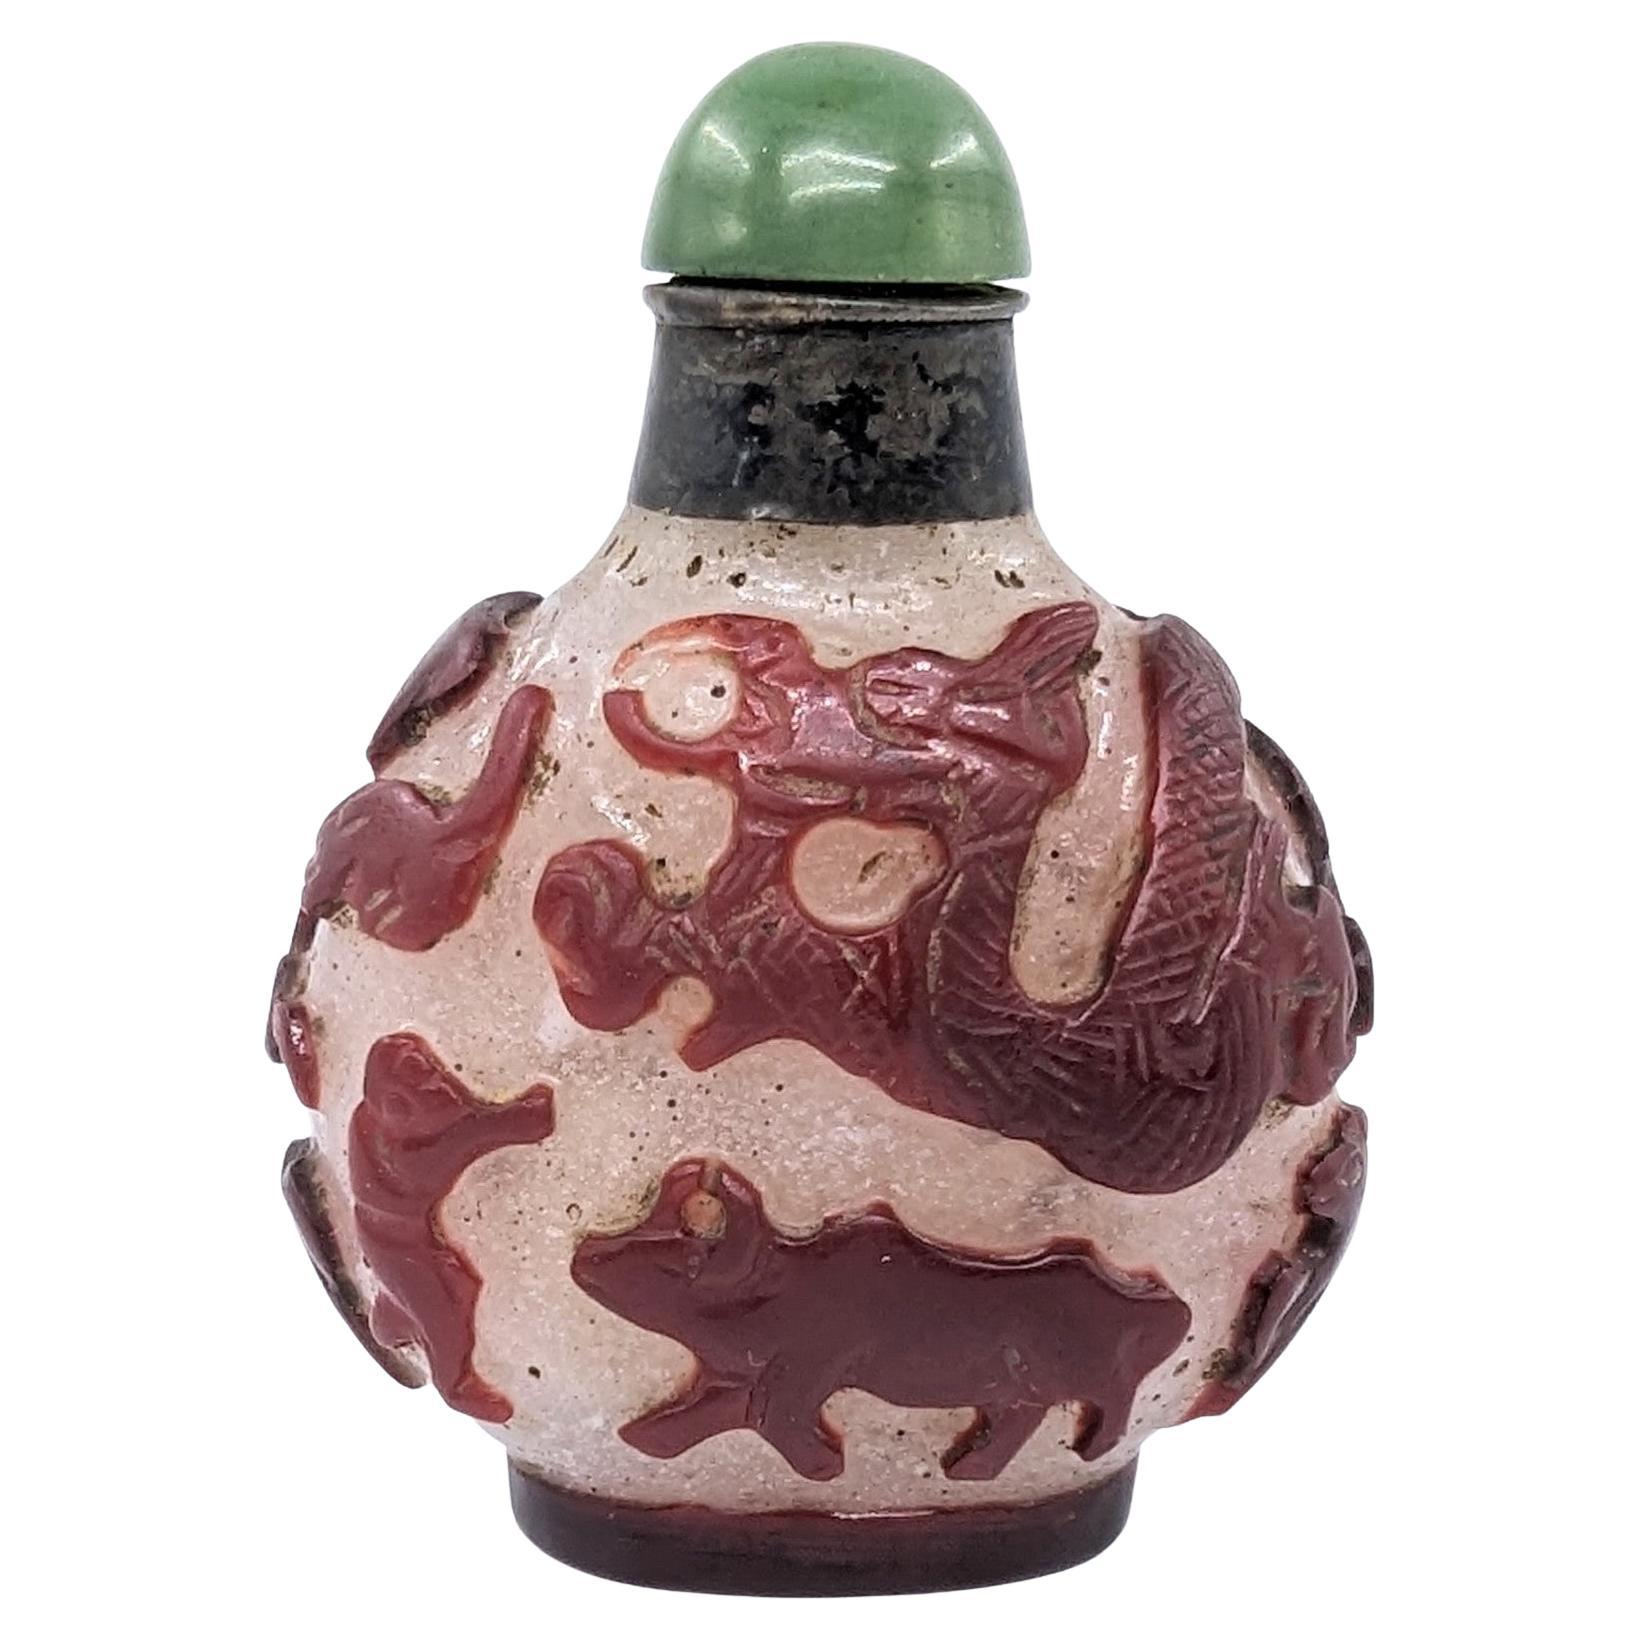 Antique Chinese ruby red carved glass overlay snuff bottle with 12 zodiac animals on snowstorm ground. Old repair to neck, green cabochon  jade stopper and spoon

19th Century, Qing Dynasty